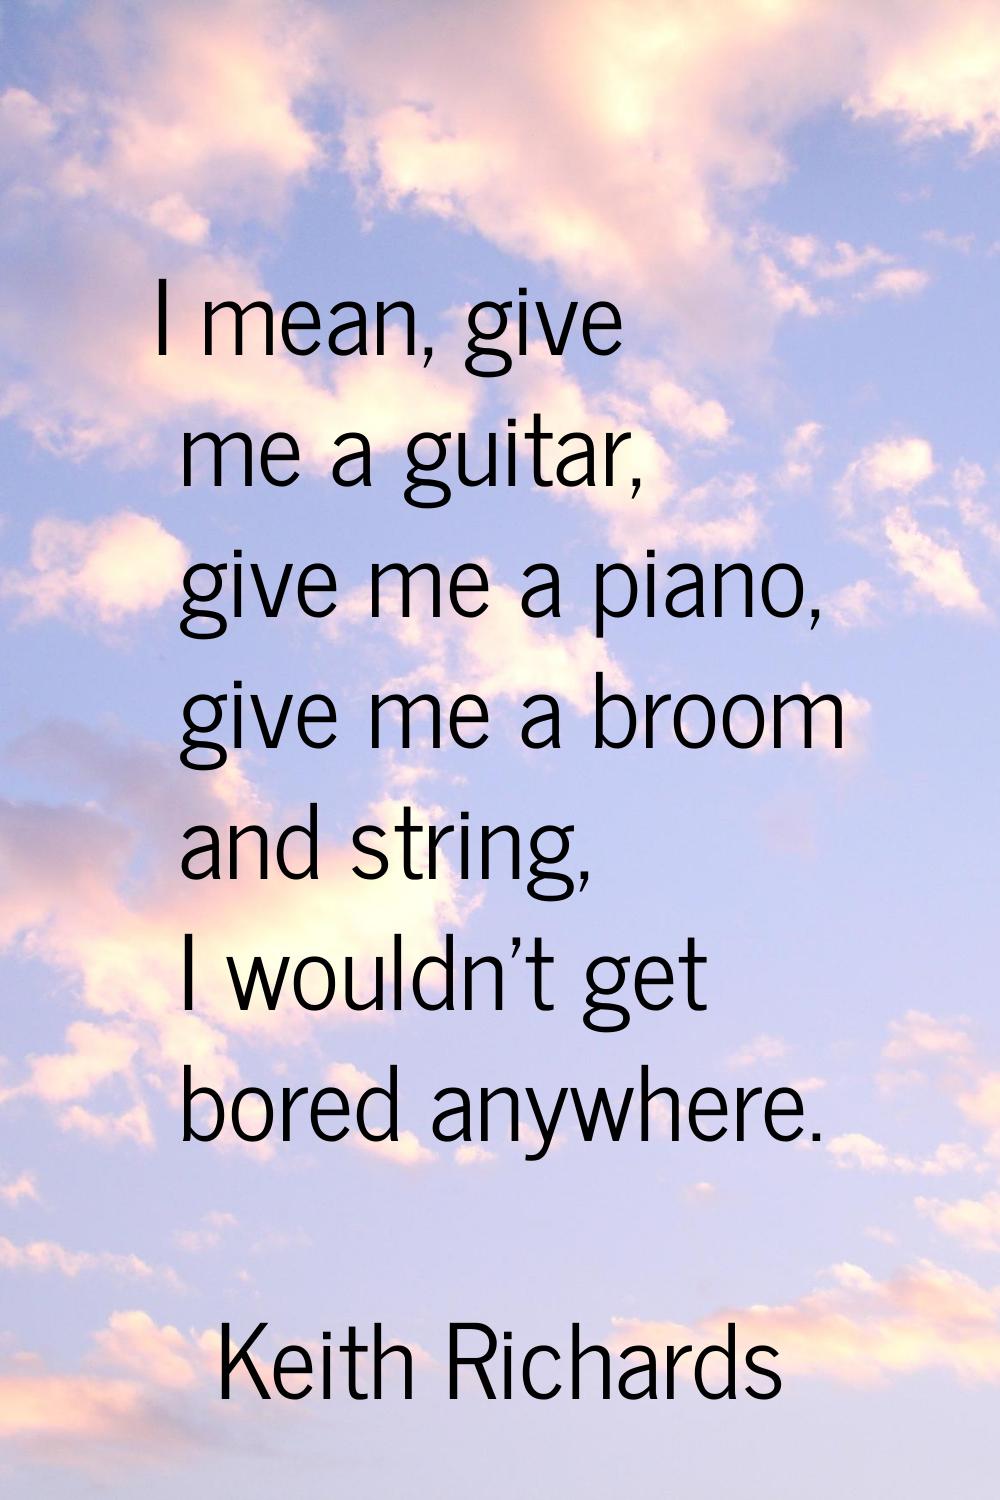 I mean, give me a guitar, give me a piano, give me a broom and string, I wouldn't get bored anywher